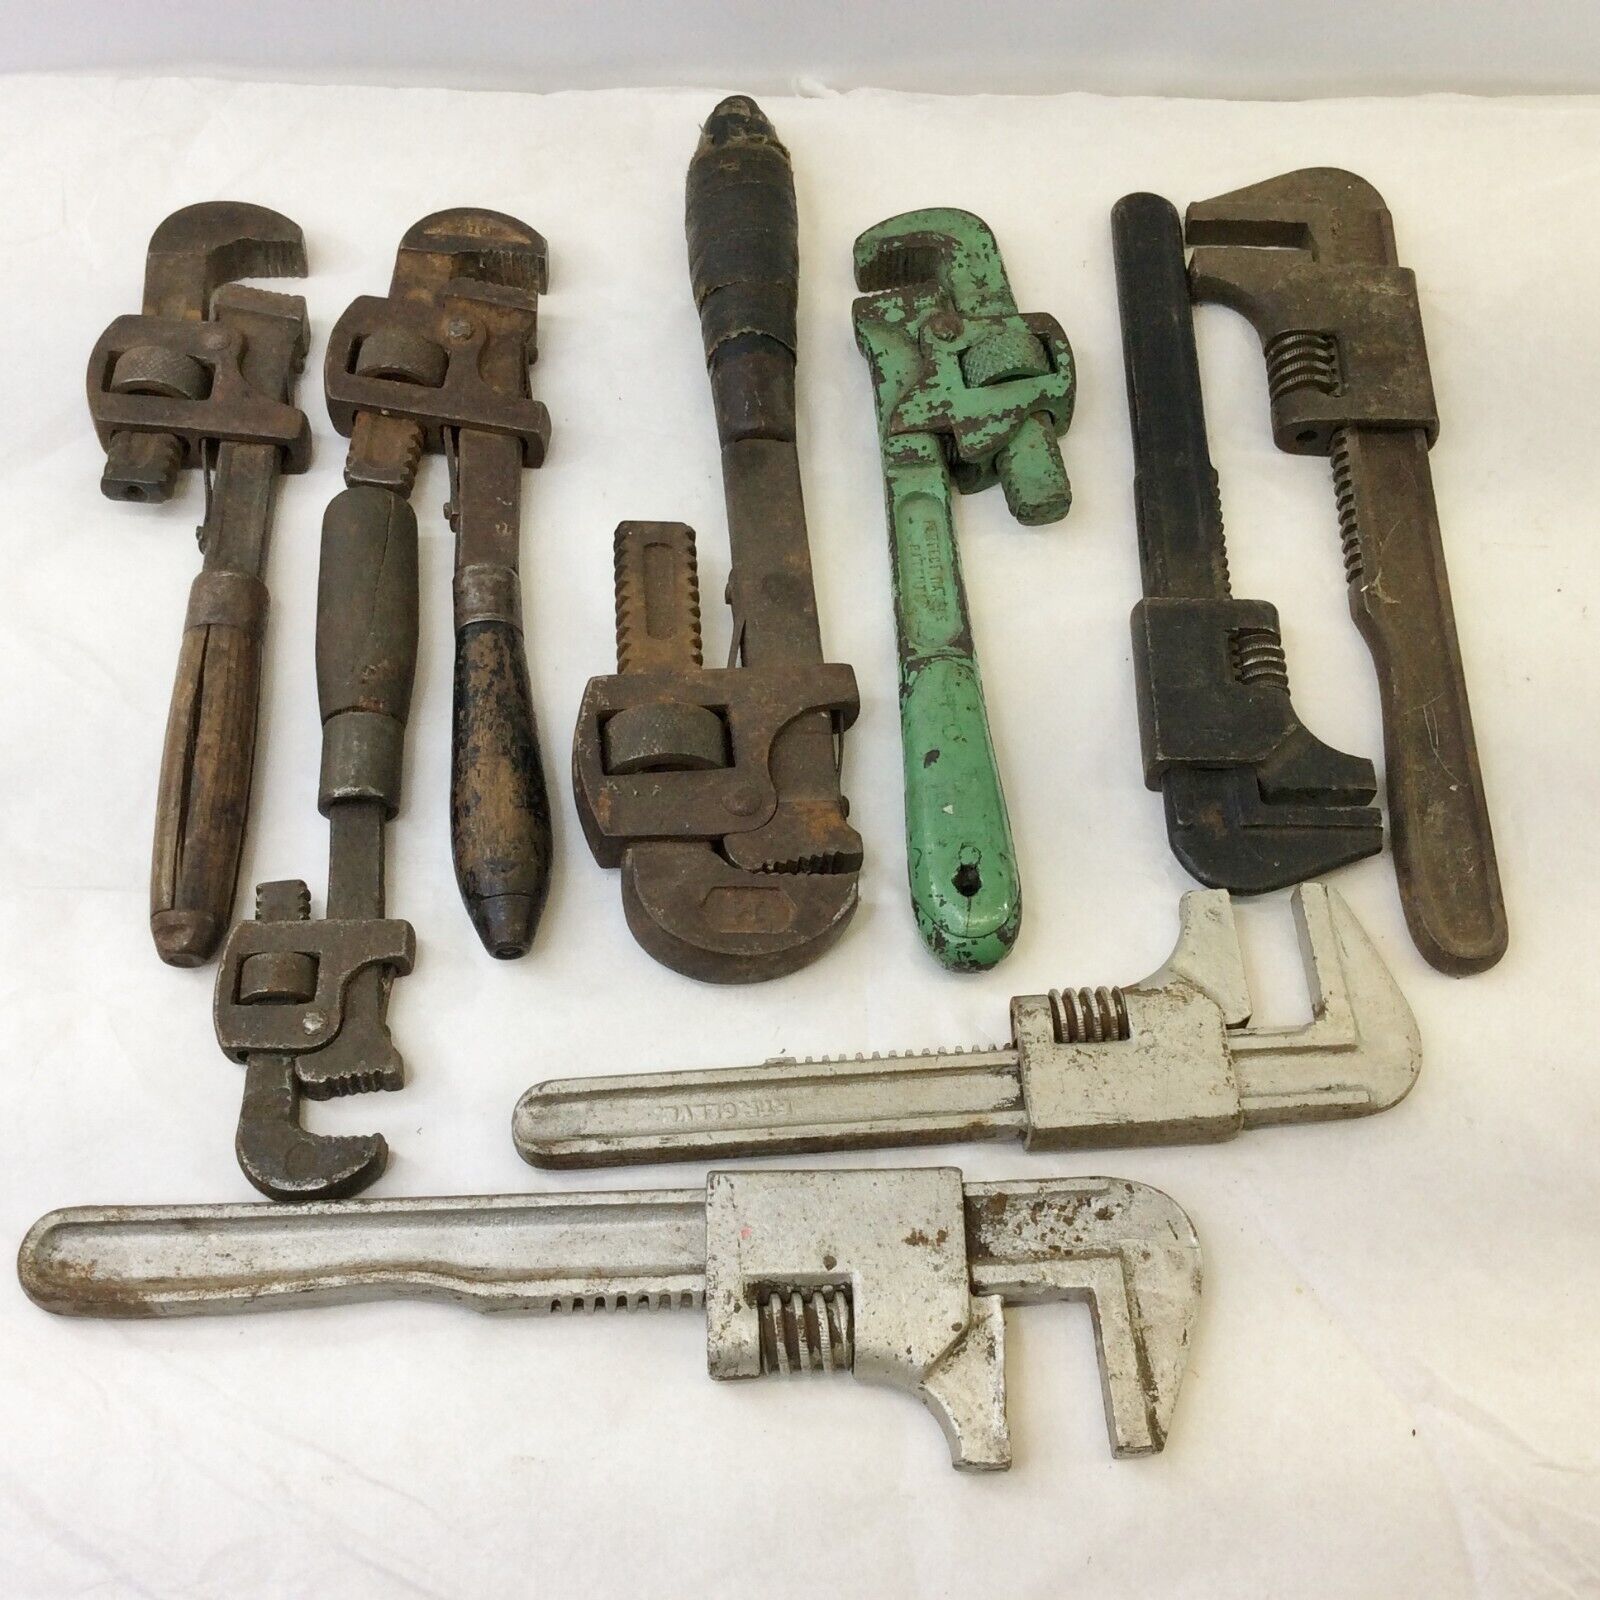 Vintage Wrenches Monkey Pipe Lot of 9 Wood Metal Handle FTF Cleve Trend Smith